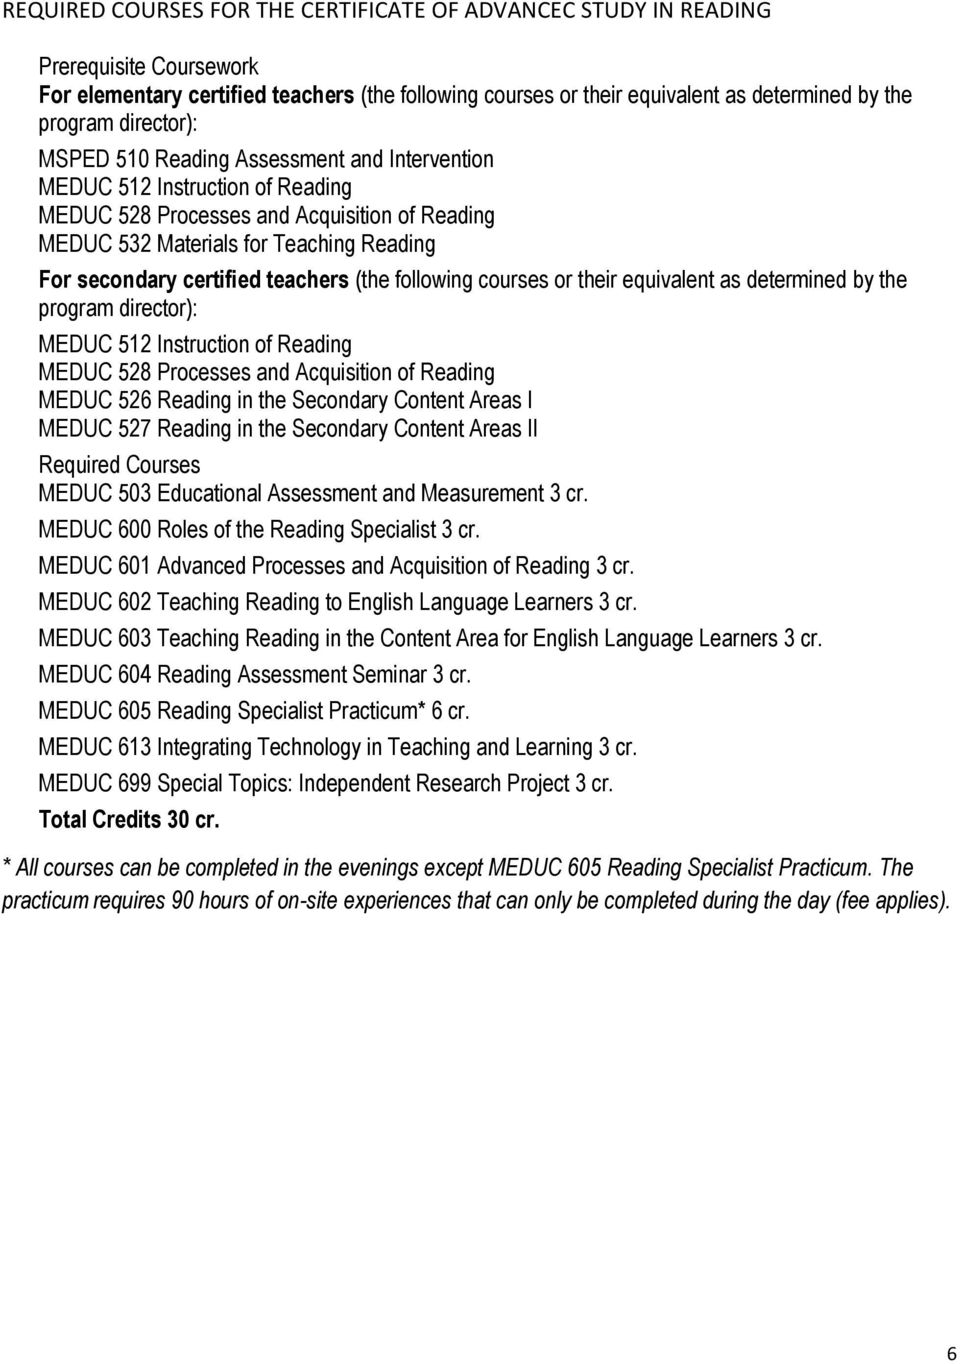 certified teachers (the following courses or their equivalent as determined by the program director): MEDUC 512 Instruction of Reading MEDUC 528 Processes and Acquisition of Reading MEDUC 526 Reading